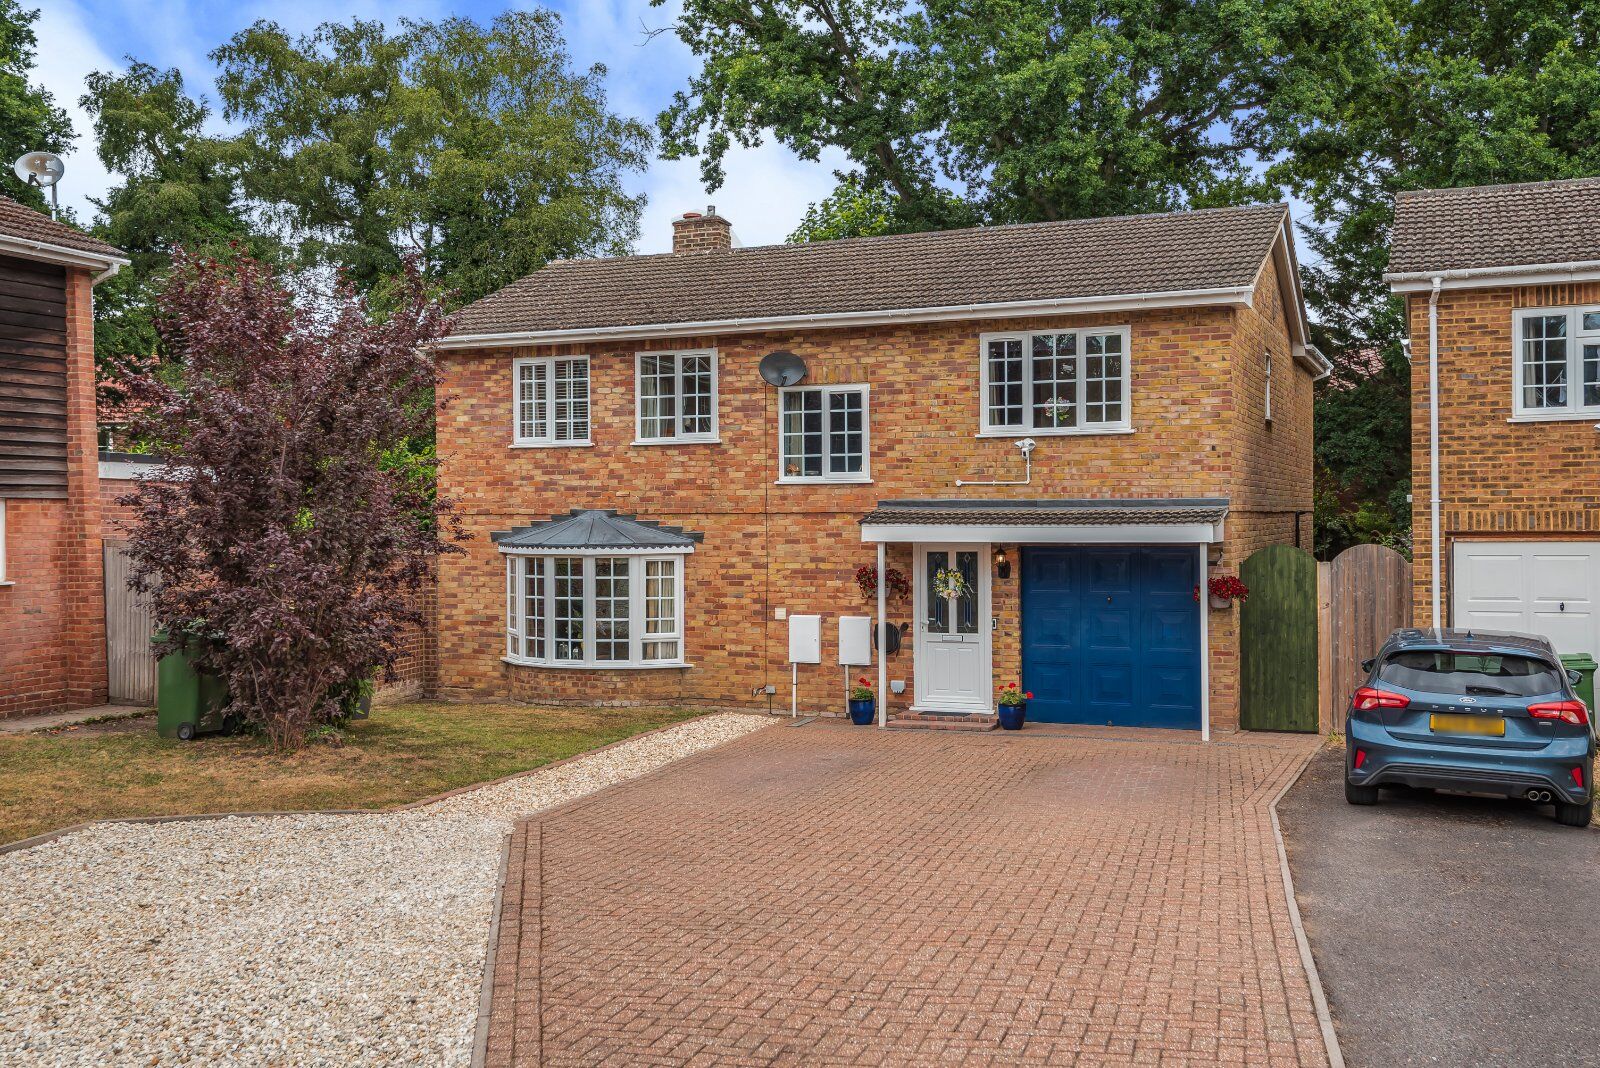 5 bedroom detached house for sale Auclum Close, Burghfield Common, RG7, main image